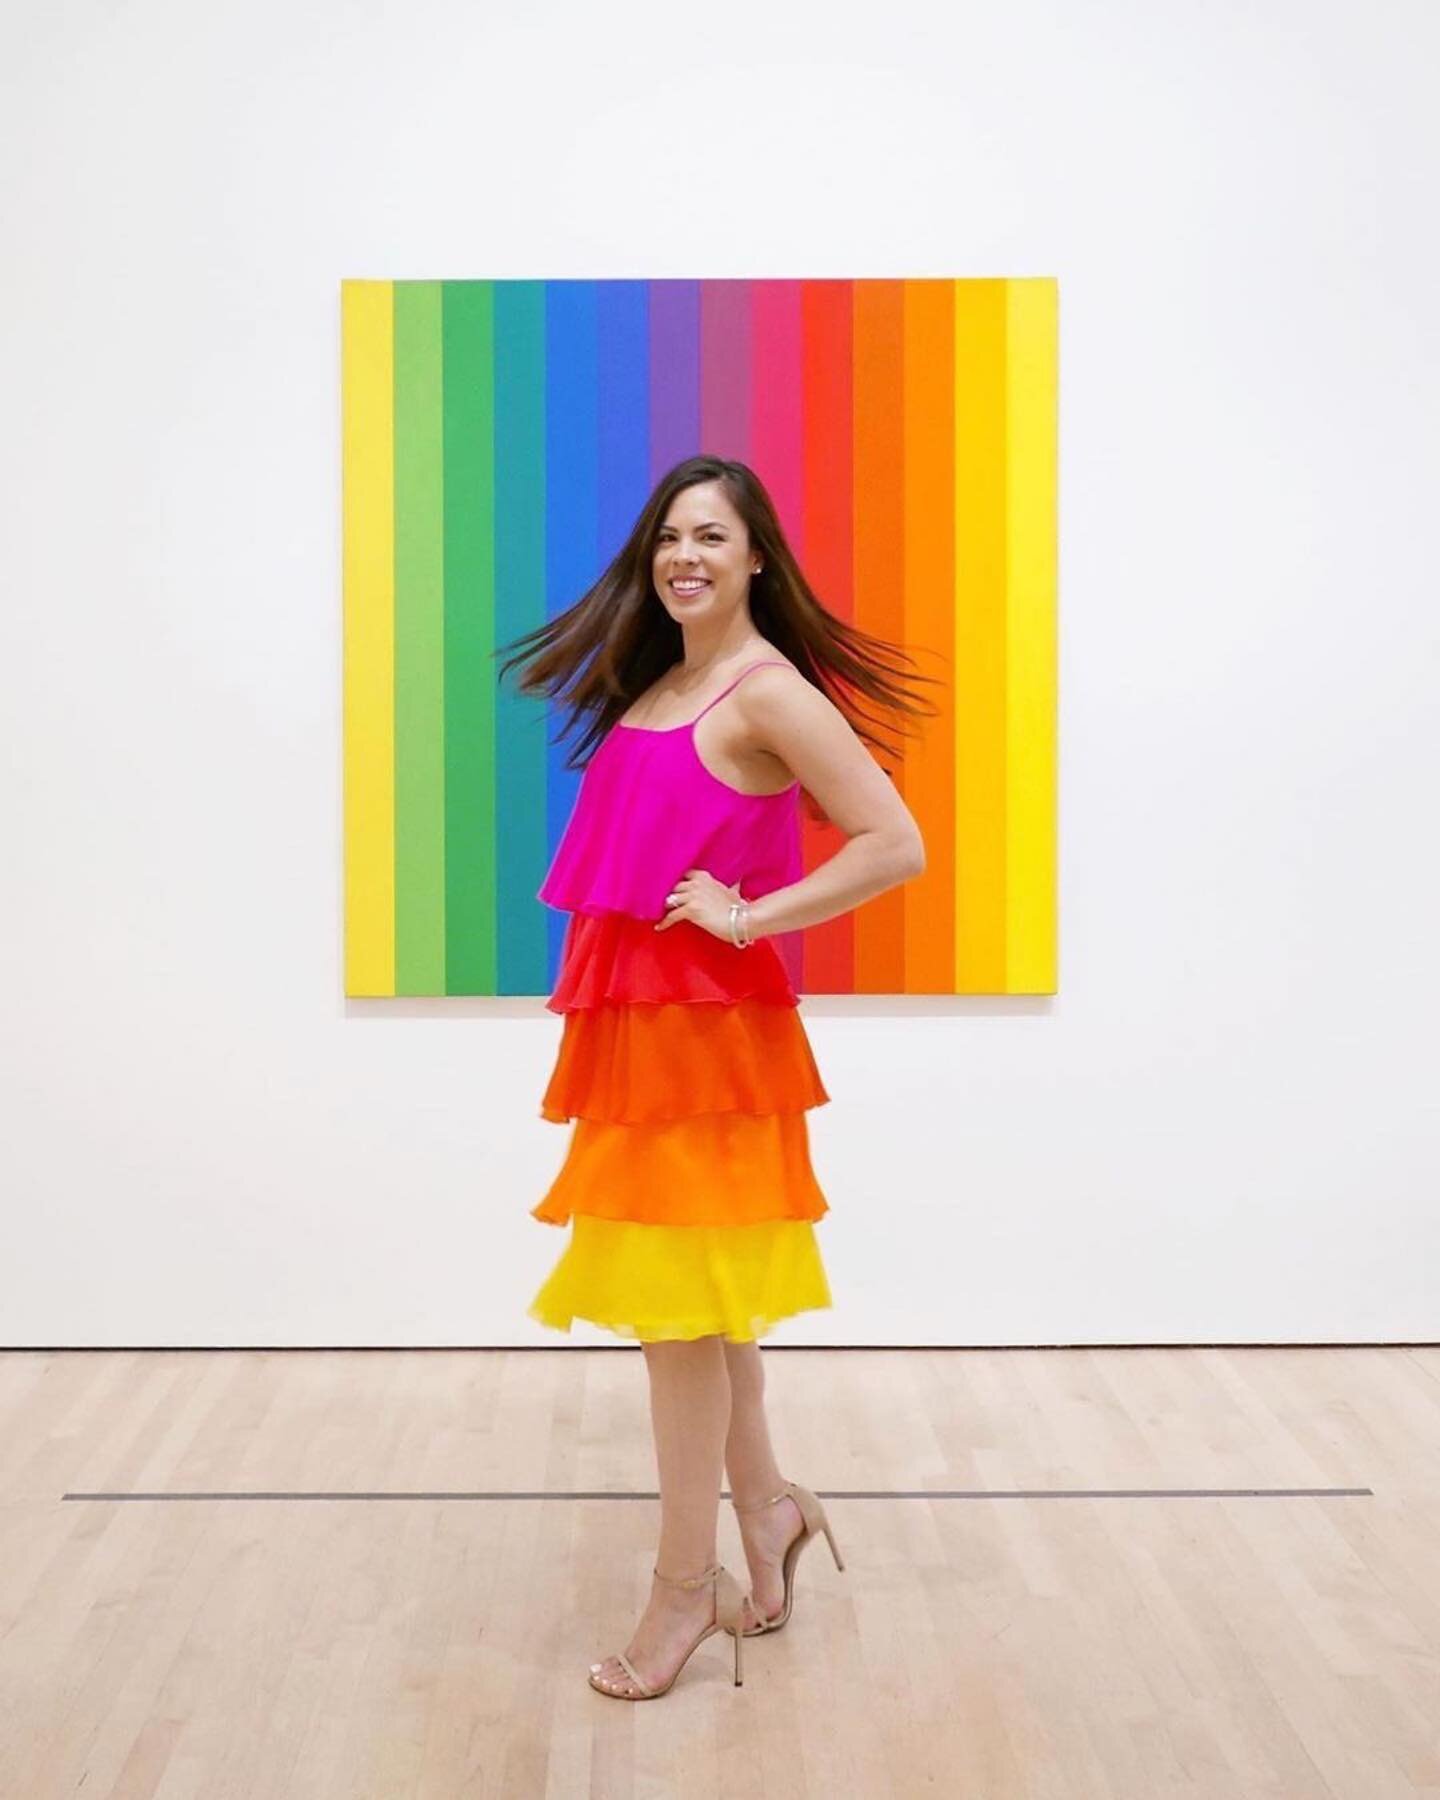 💛💚💙💜❤️🧡 If I had to pick a favorite, this would be the one 🤩 A happy #dressedtomatch moment with Ellsworth Kelly&rsquo;s piece at @sfmoma ✨ I hope this match brightens your feed today! 🎨🌈